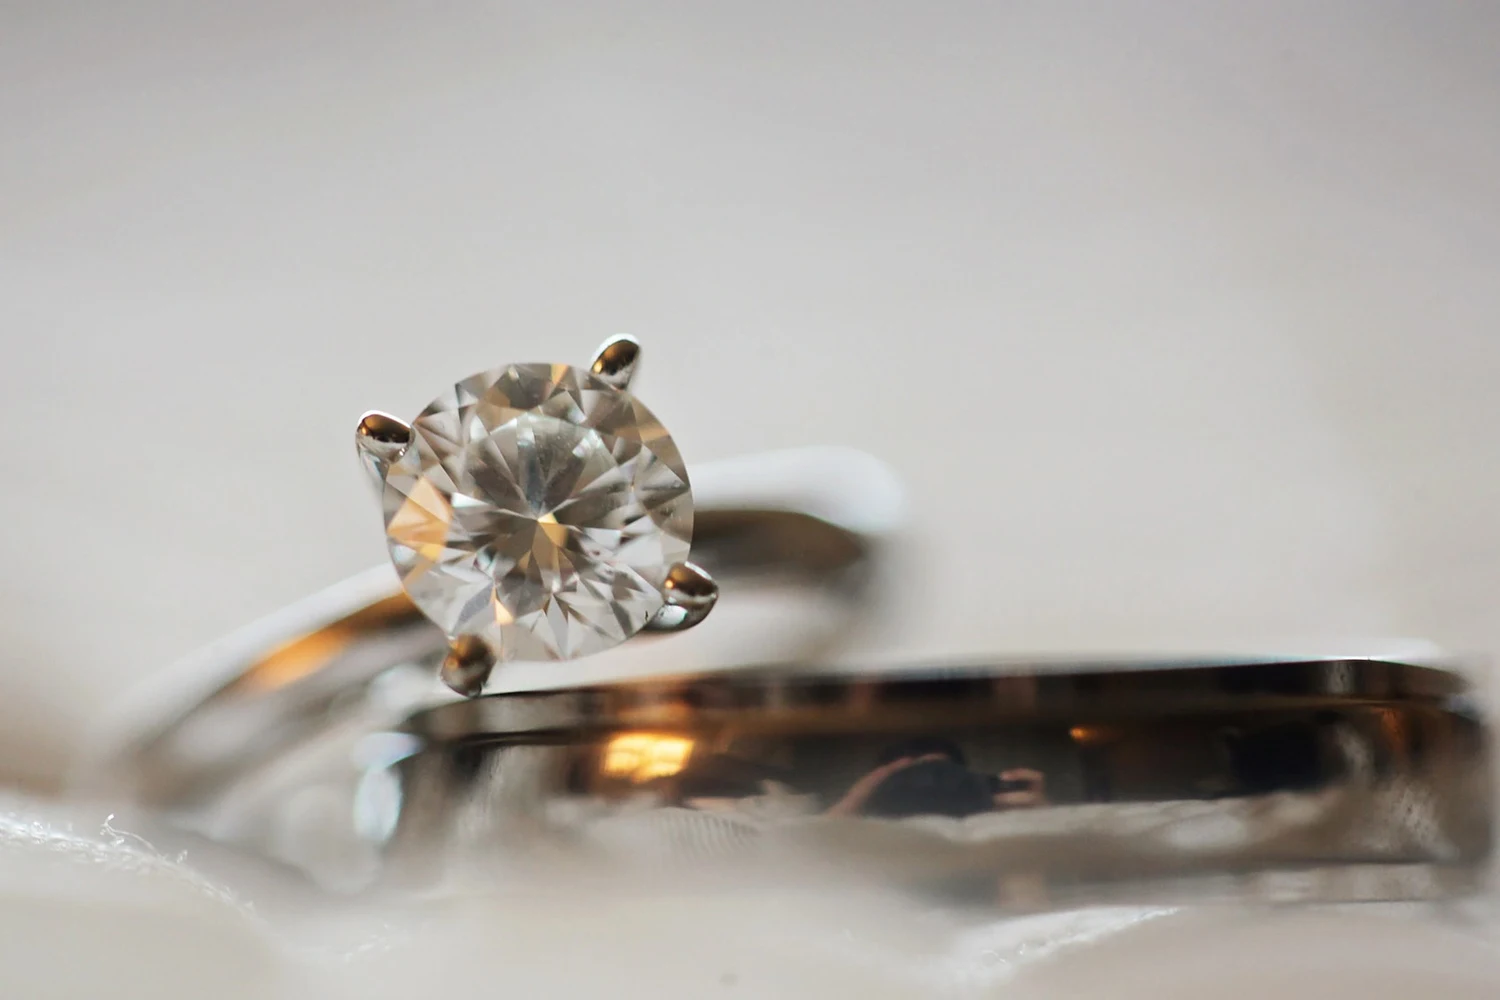 a close up picture of a diamond ring with an old european cut diamond